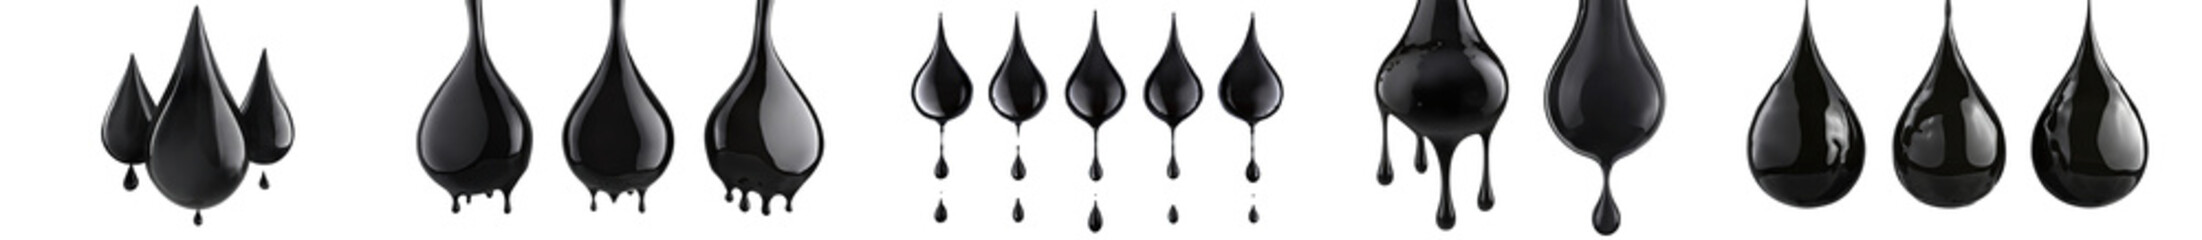  collection of black ink droplets, reminiscent of crude oil, expertly isolated on a transparent background. Available in PNG format with a cutout or clipping path.